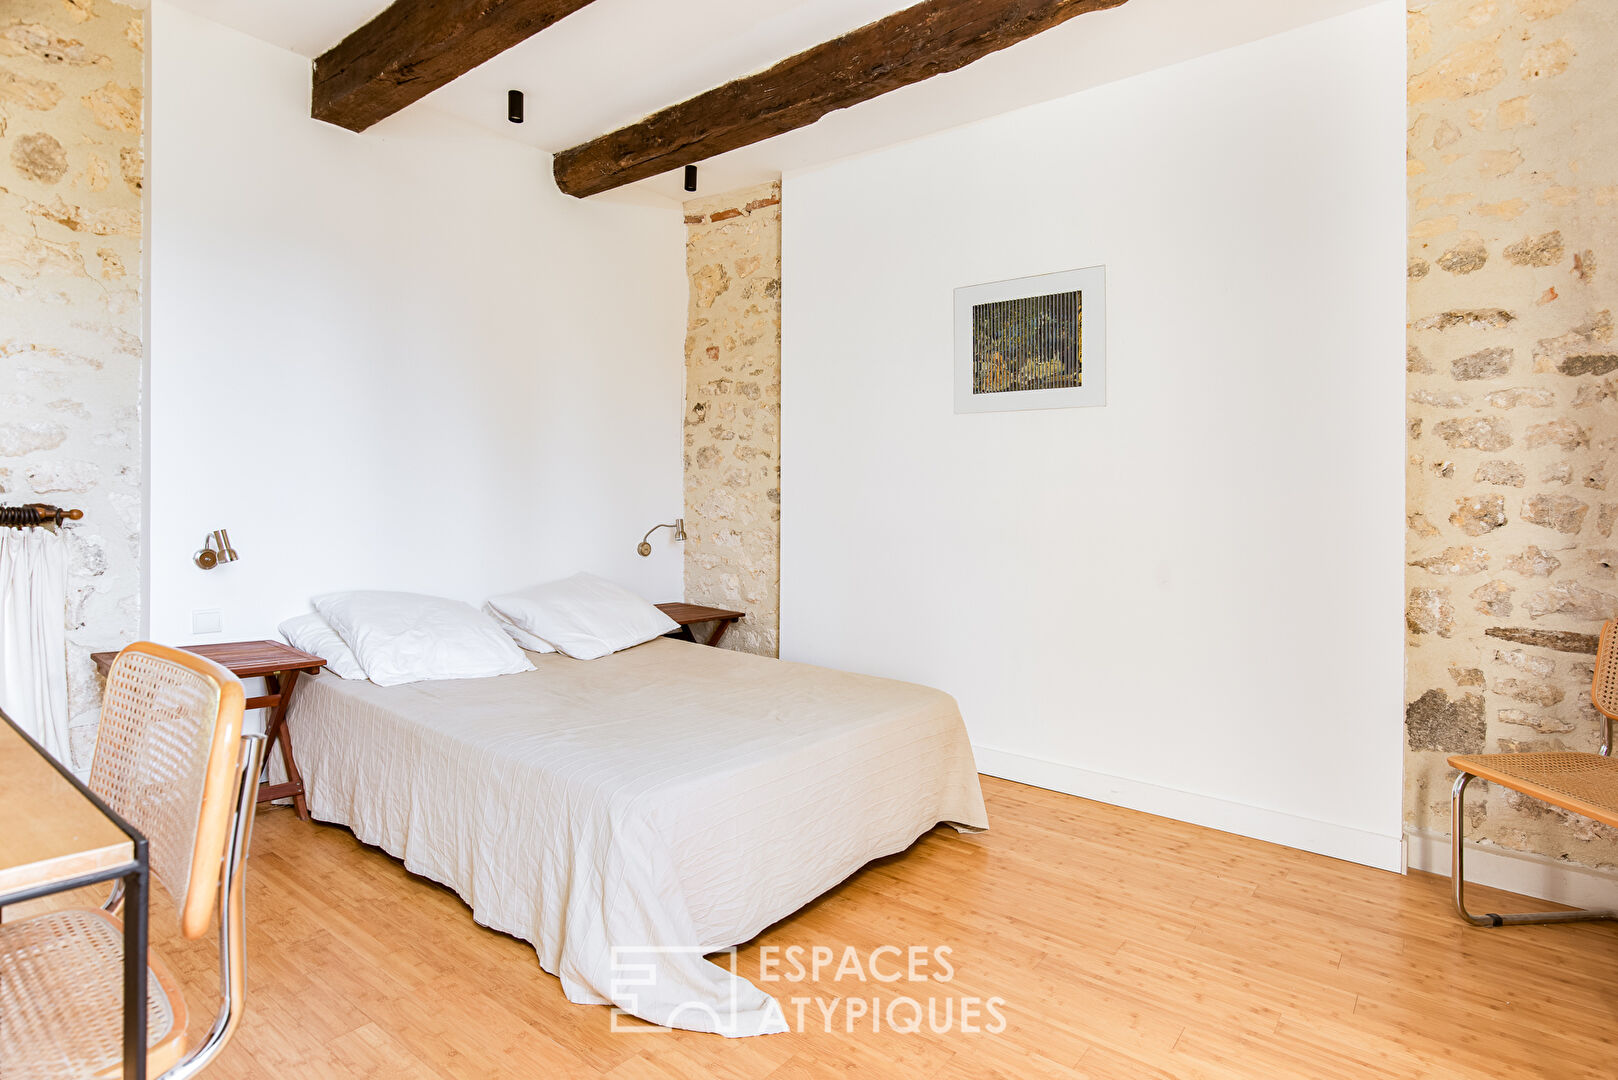 Renovated farmhouse with gîtes in the Cordaise countryside.